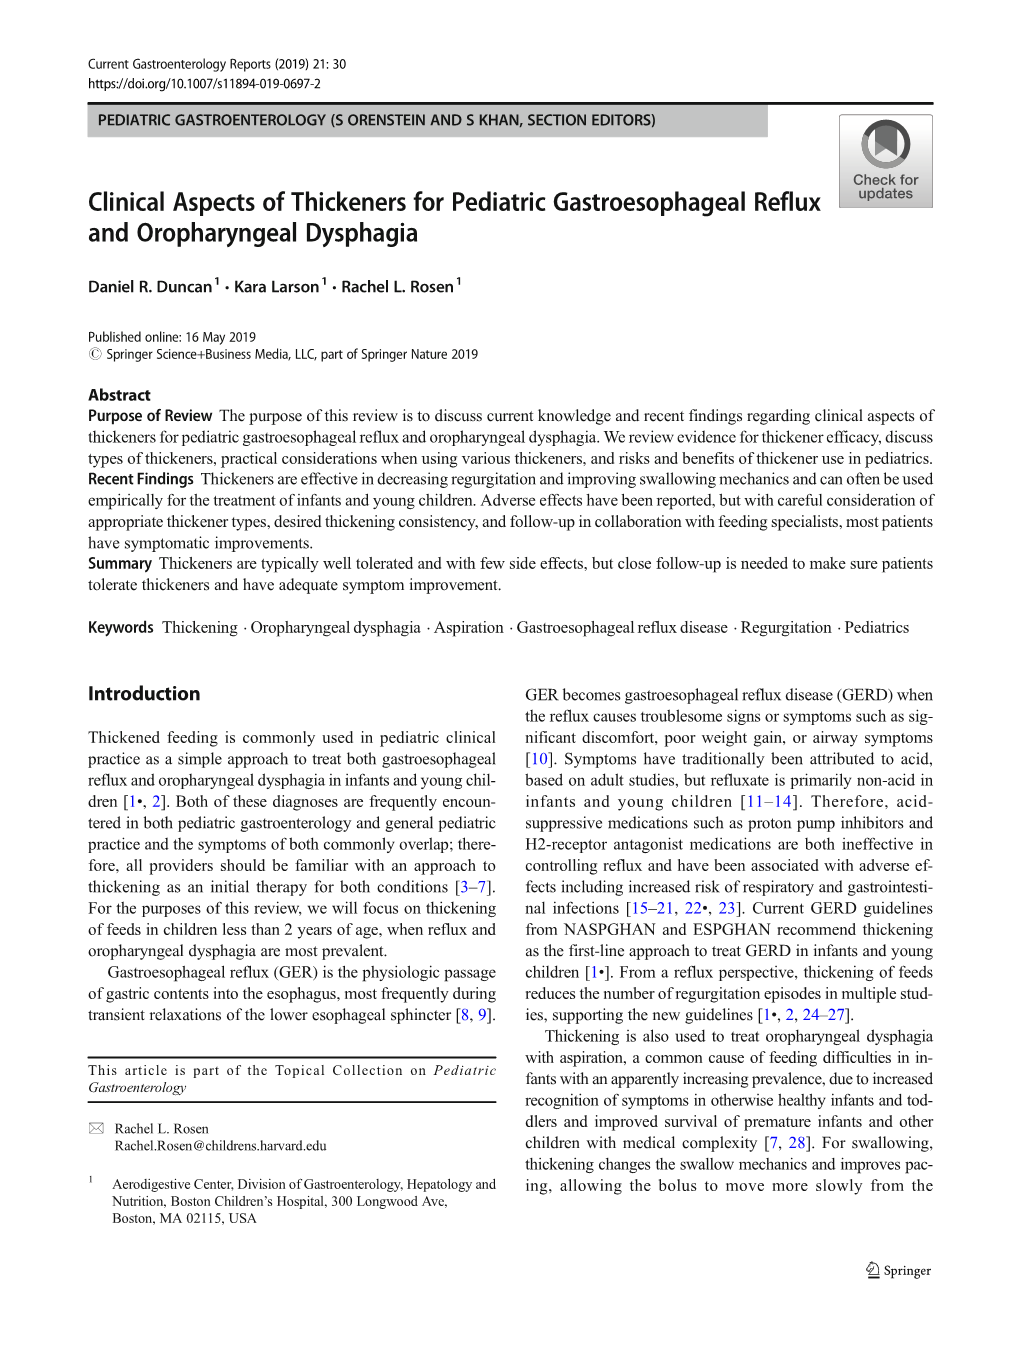 Clinical Aspects of Thickeners for Pediatric Gastroesophageal Reflux and Oropharyngeal Dysphagia